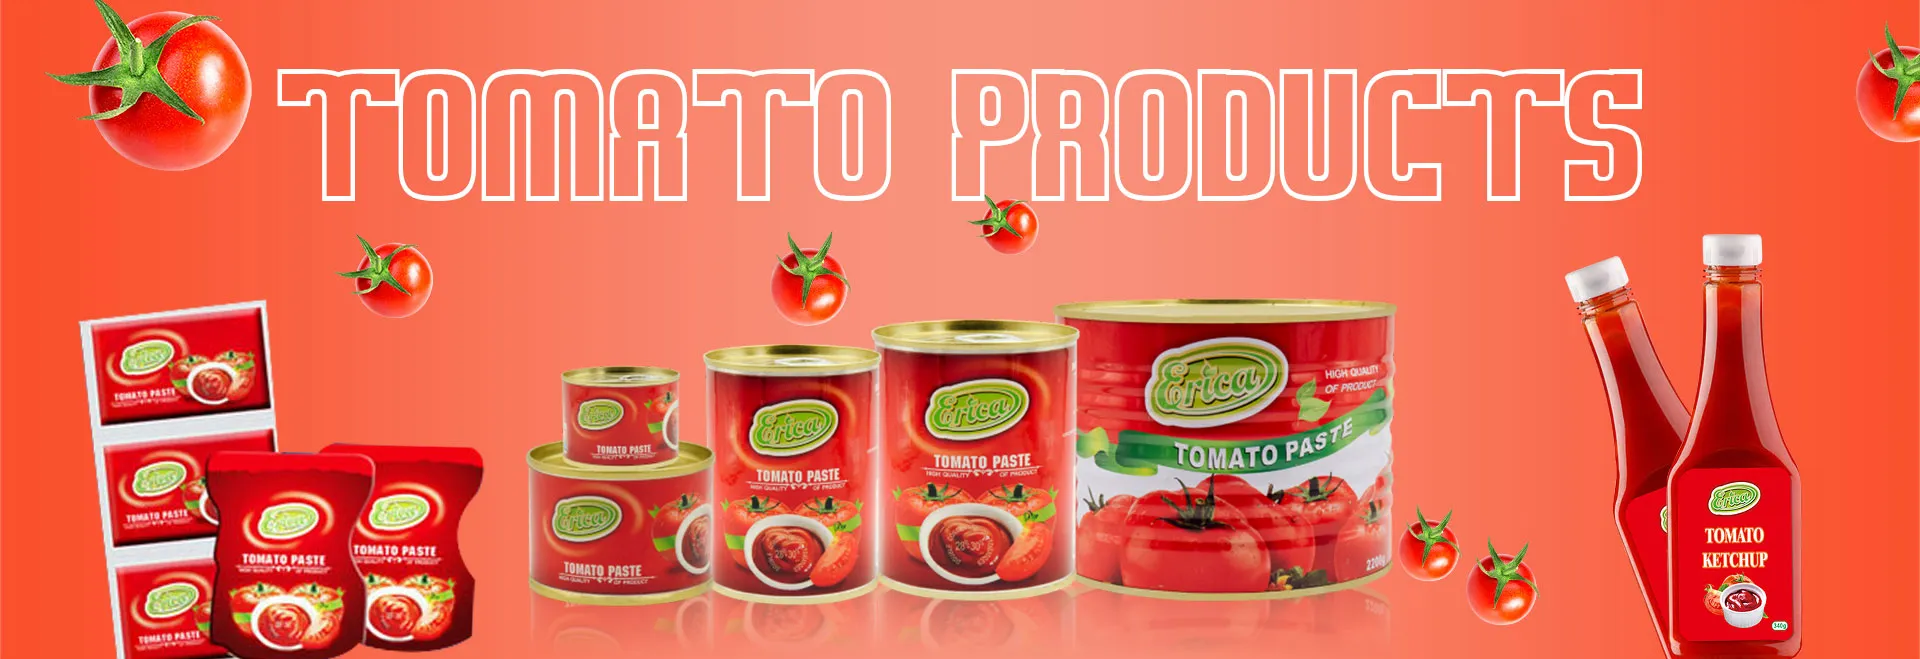 Tomato Products